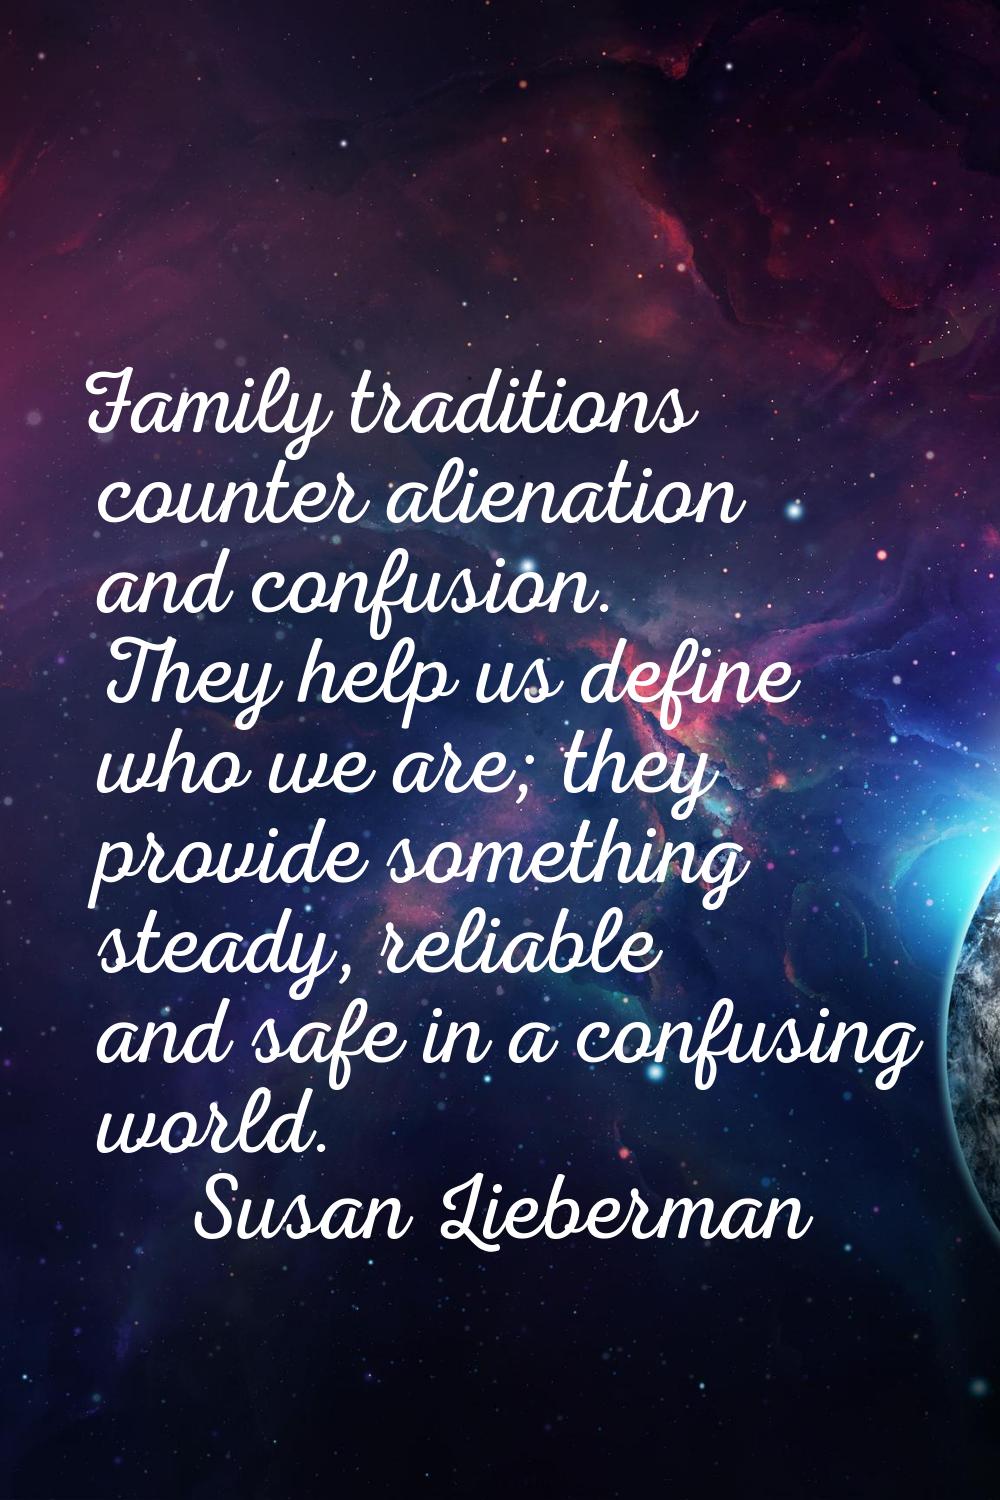 Family traditions counter alienation and confusion. They help us define who we are; they provide so